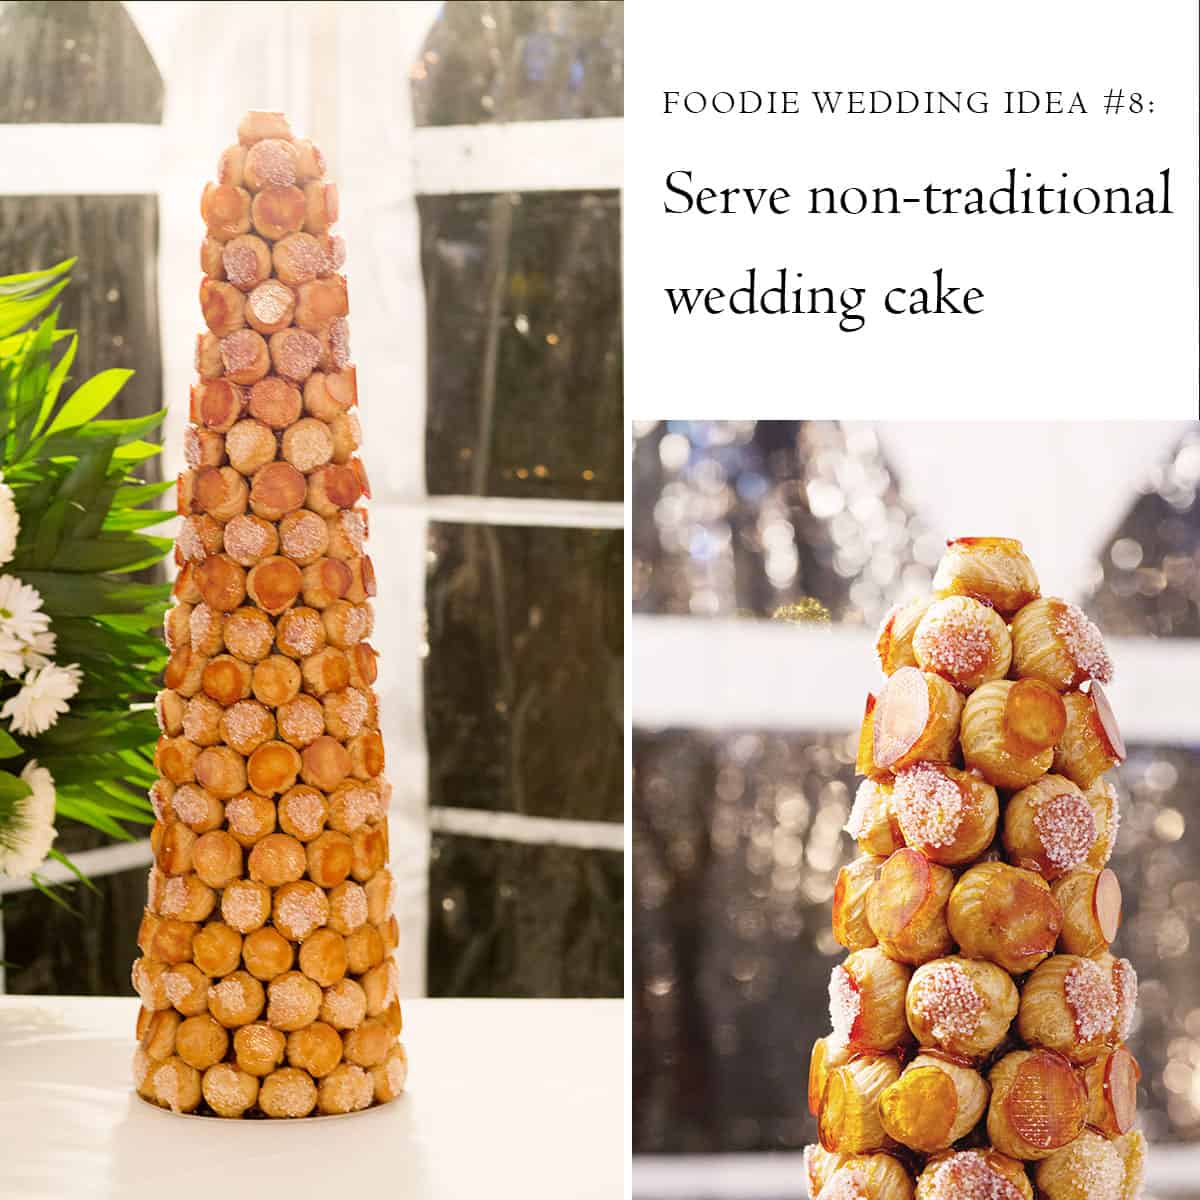 Foodie wedding idea: serve non-traditional wedding cake, like this croquembouche photographed by Kyo Morishima